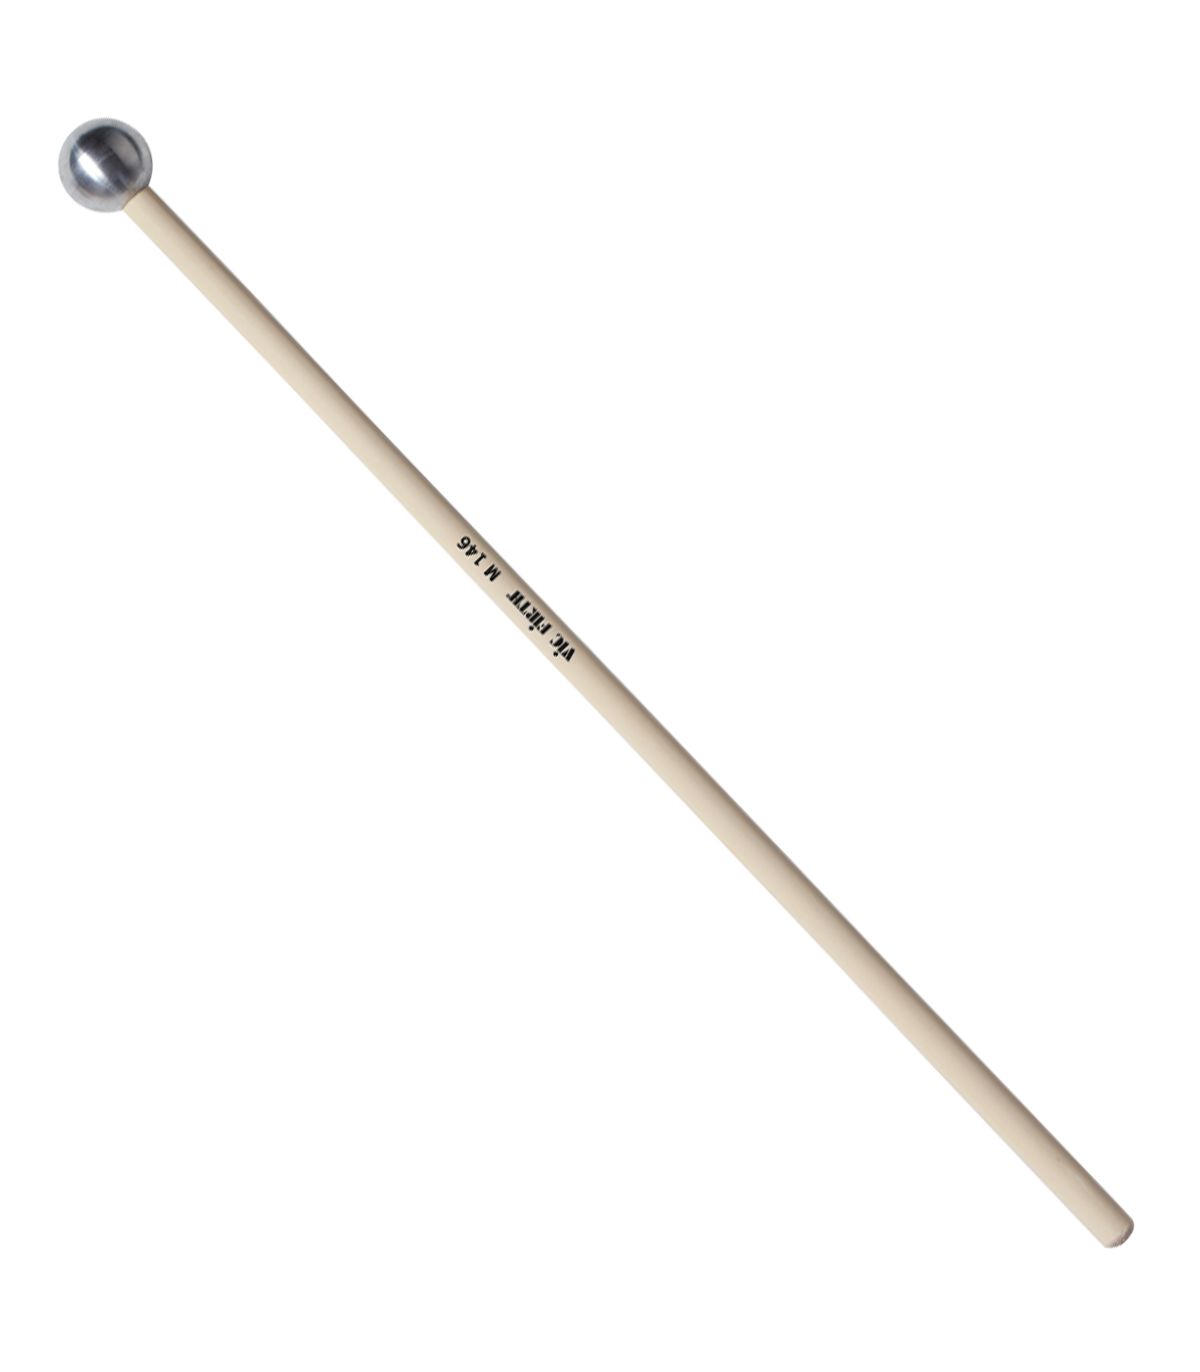 Vic Firth M146 Extra Hard Orchestral Medium Round Aluminum Percussion Keyboard Mallets for Xylophone and Bells